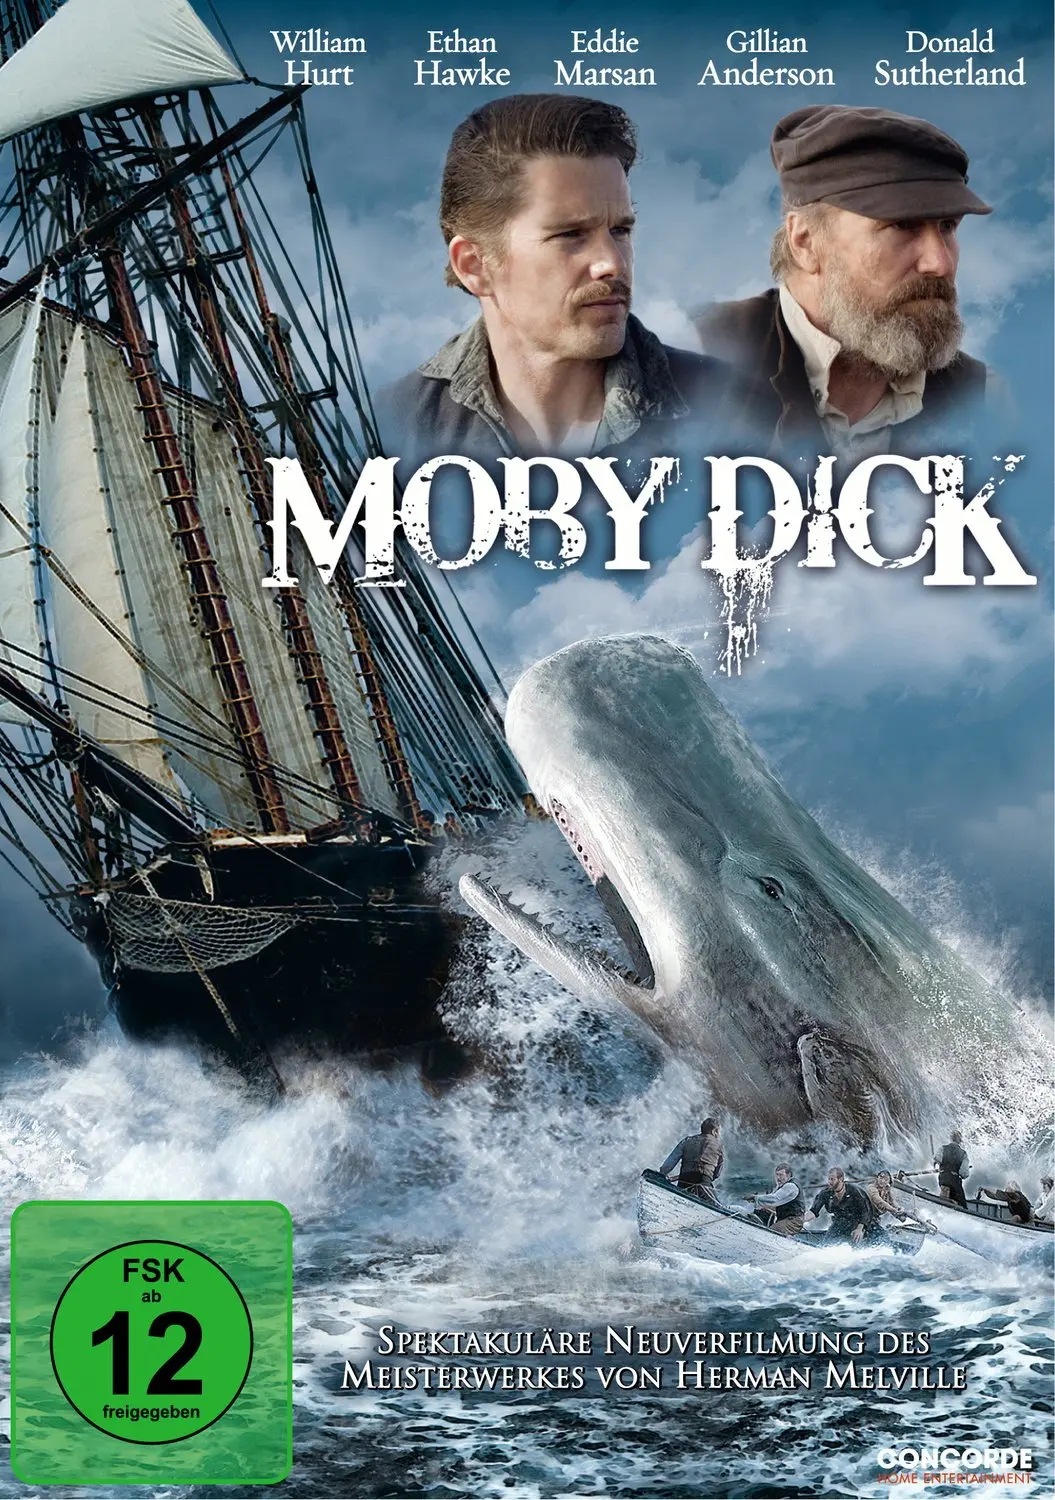 Moby Dick (2011)